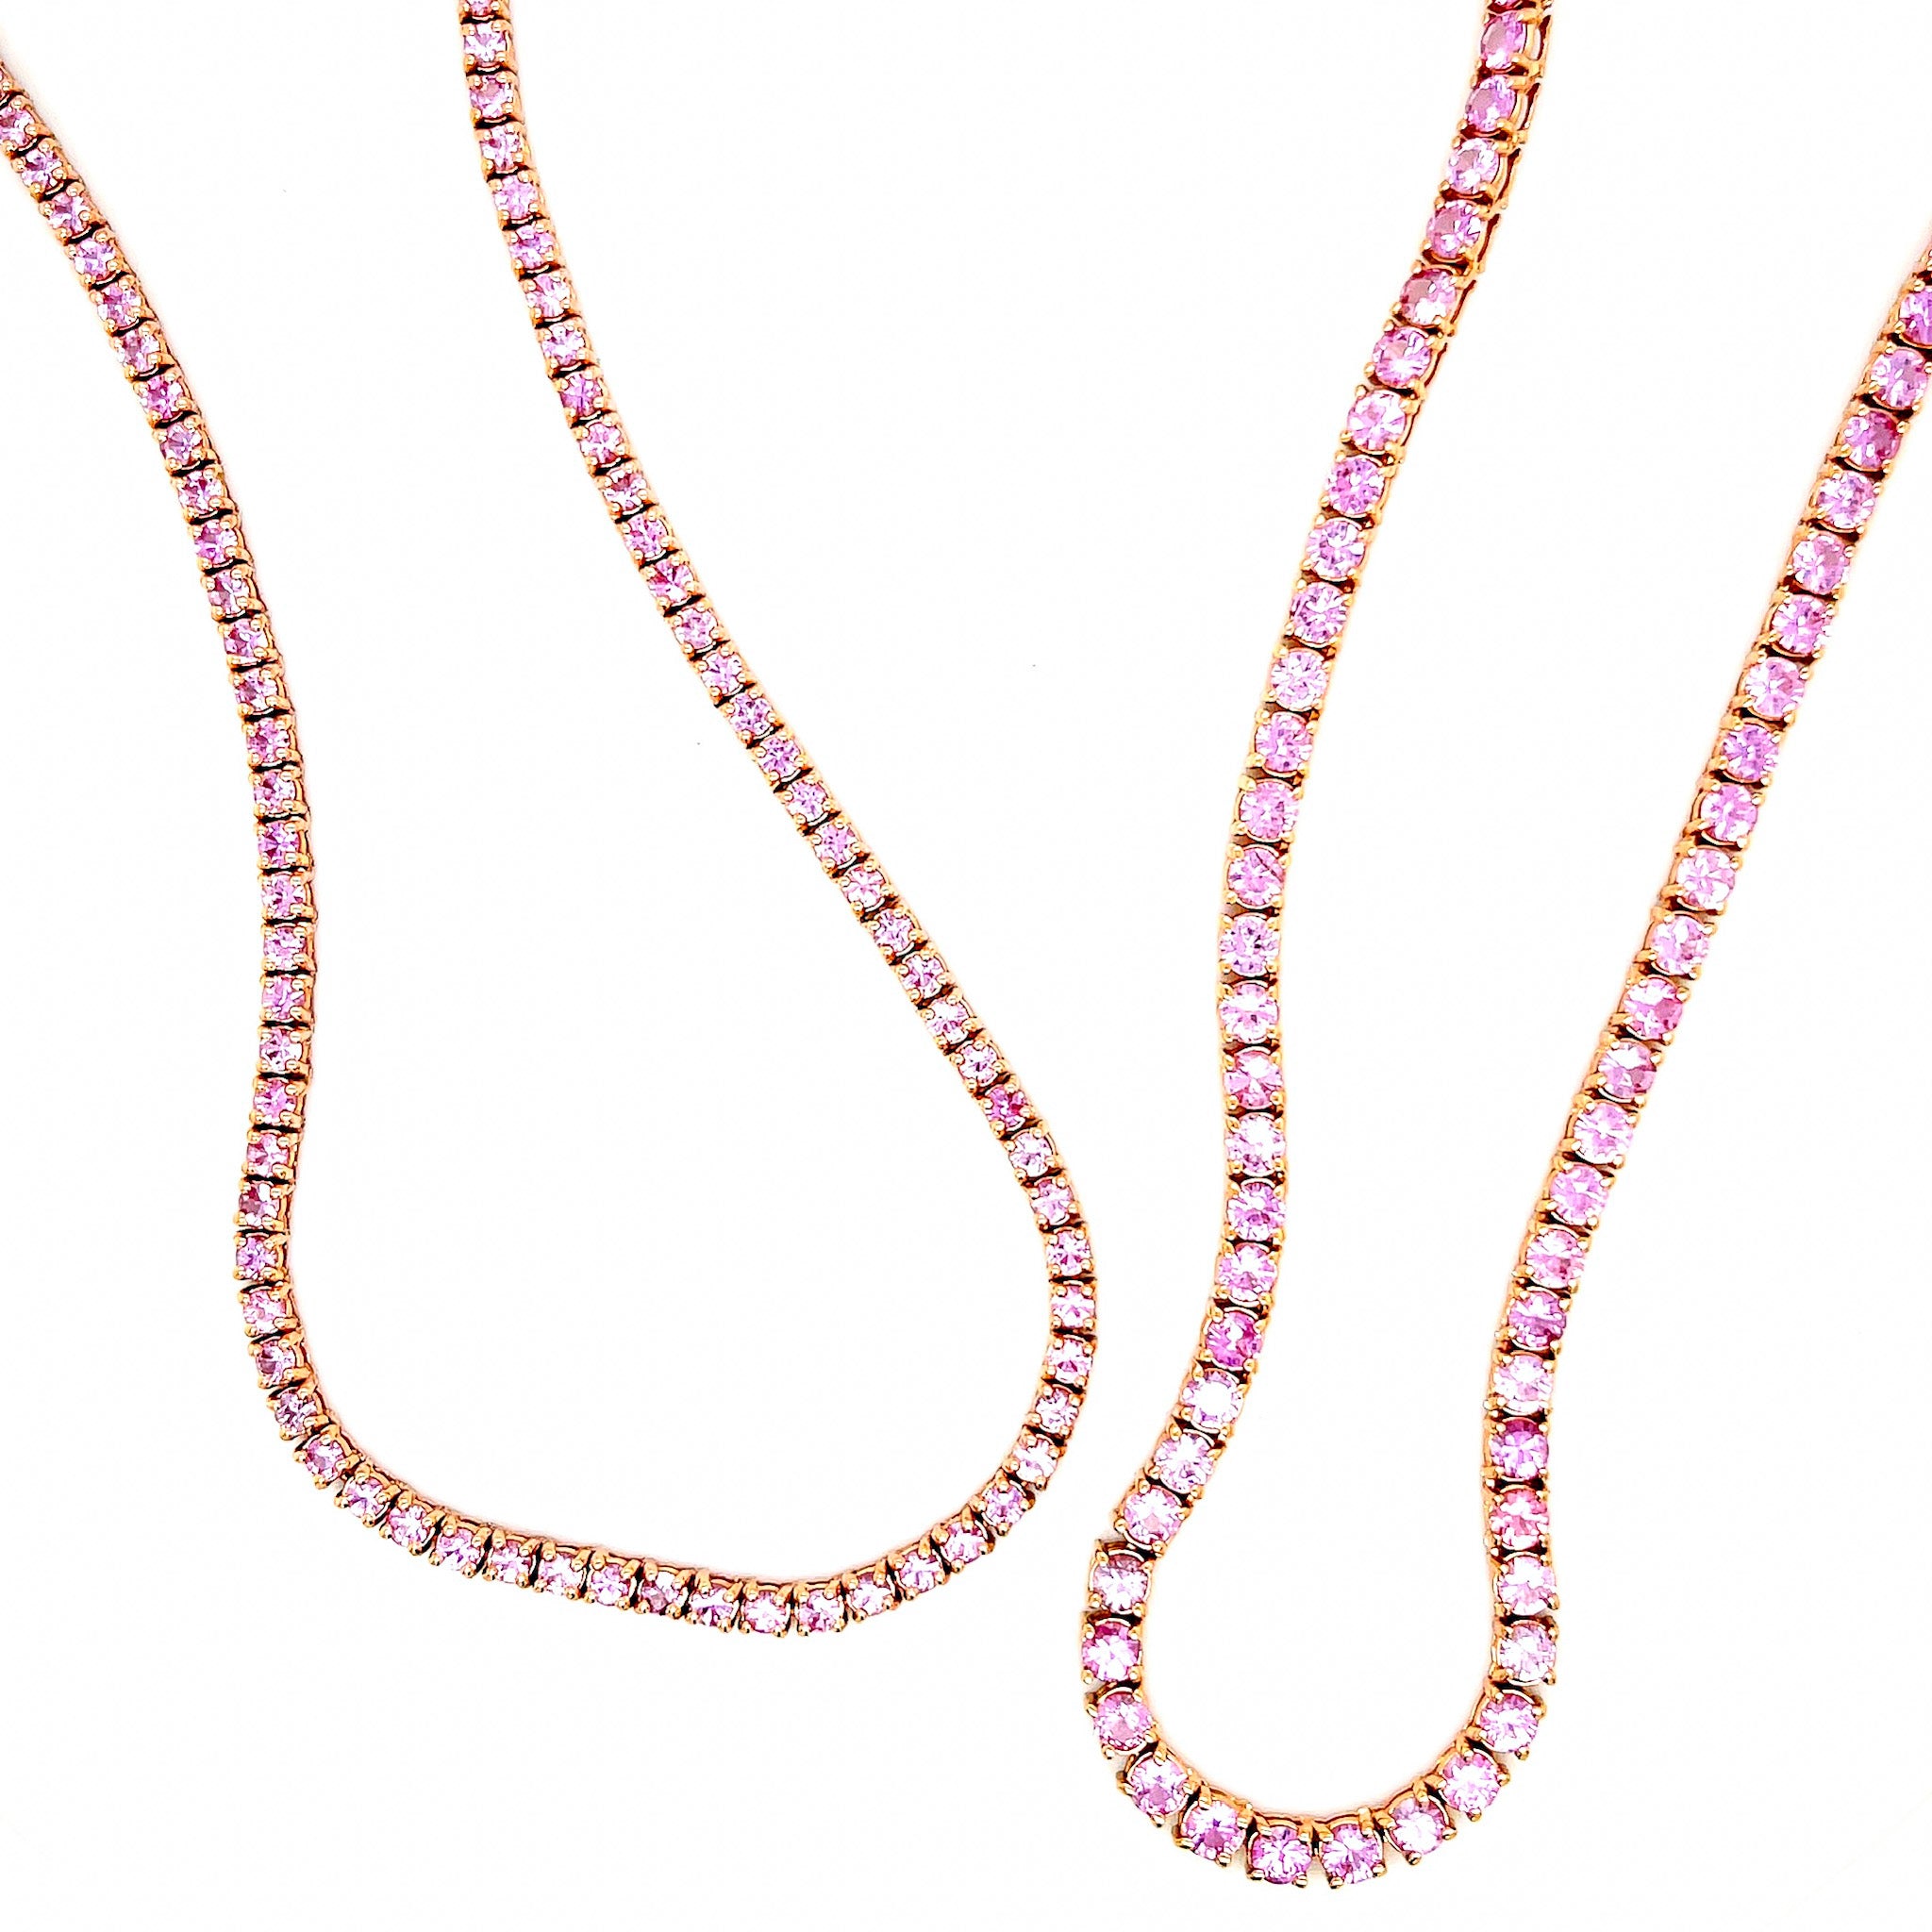 Rose Gold Finish Tennis Link Necklace Pink Lab Diamonds 18 Inch 4 MM Classy  | Amazon.com